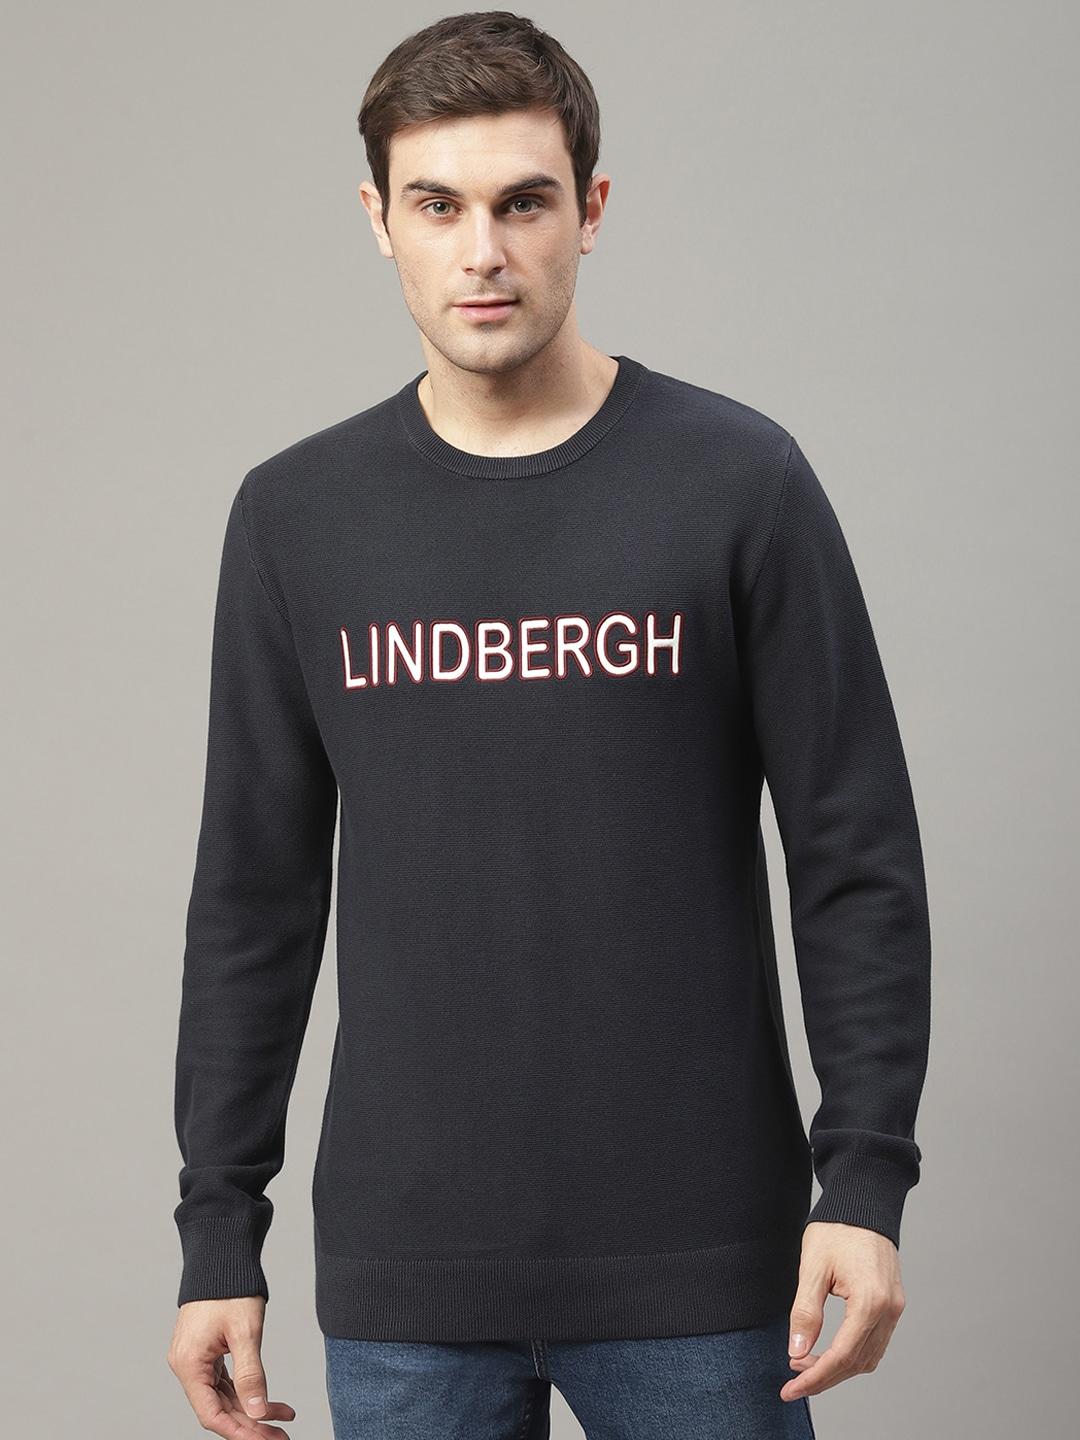 lindbergh-men-navy-blue-solid-logo-embroidered-pullover-sweater